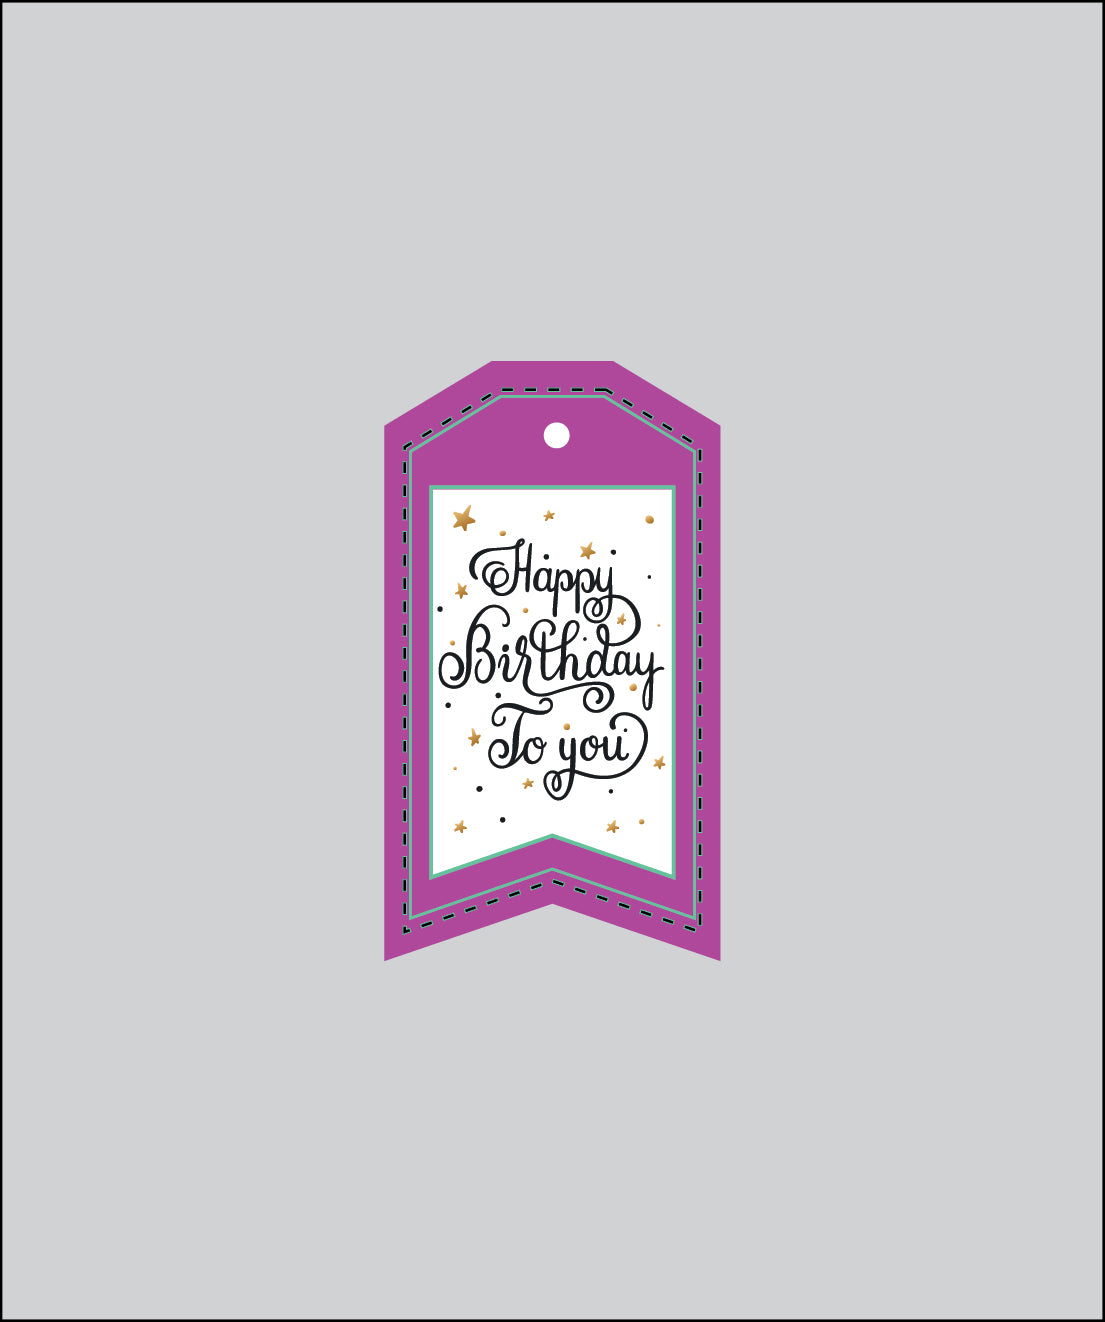 Design Tag for Packing 3d Birthday Tag